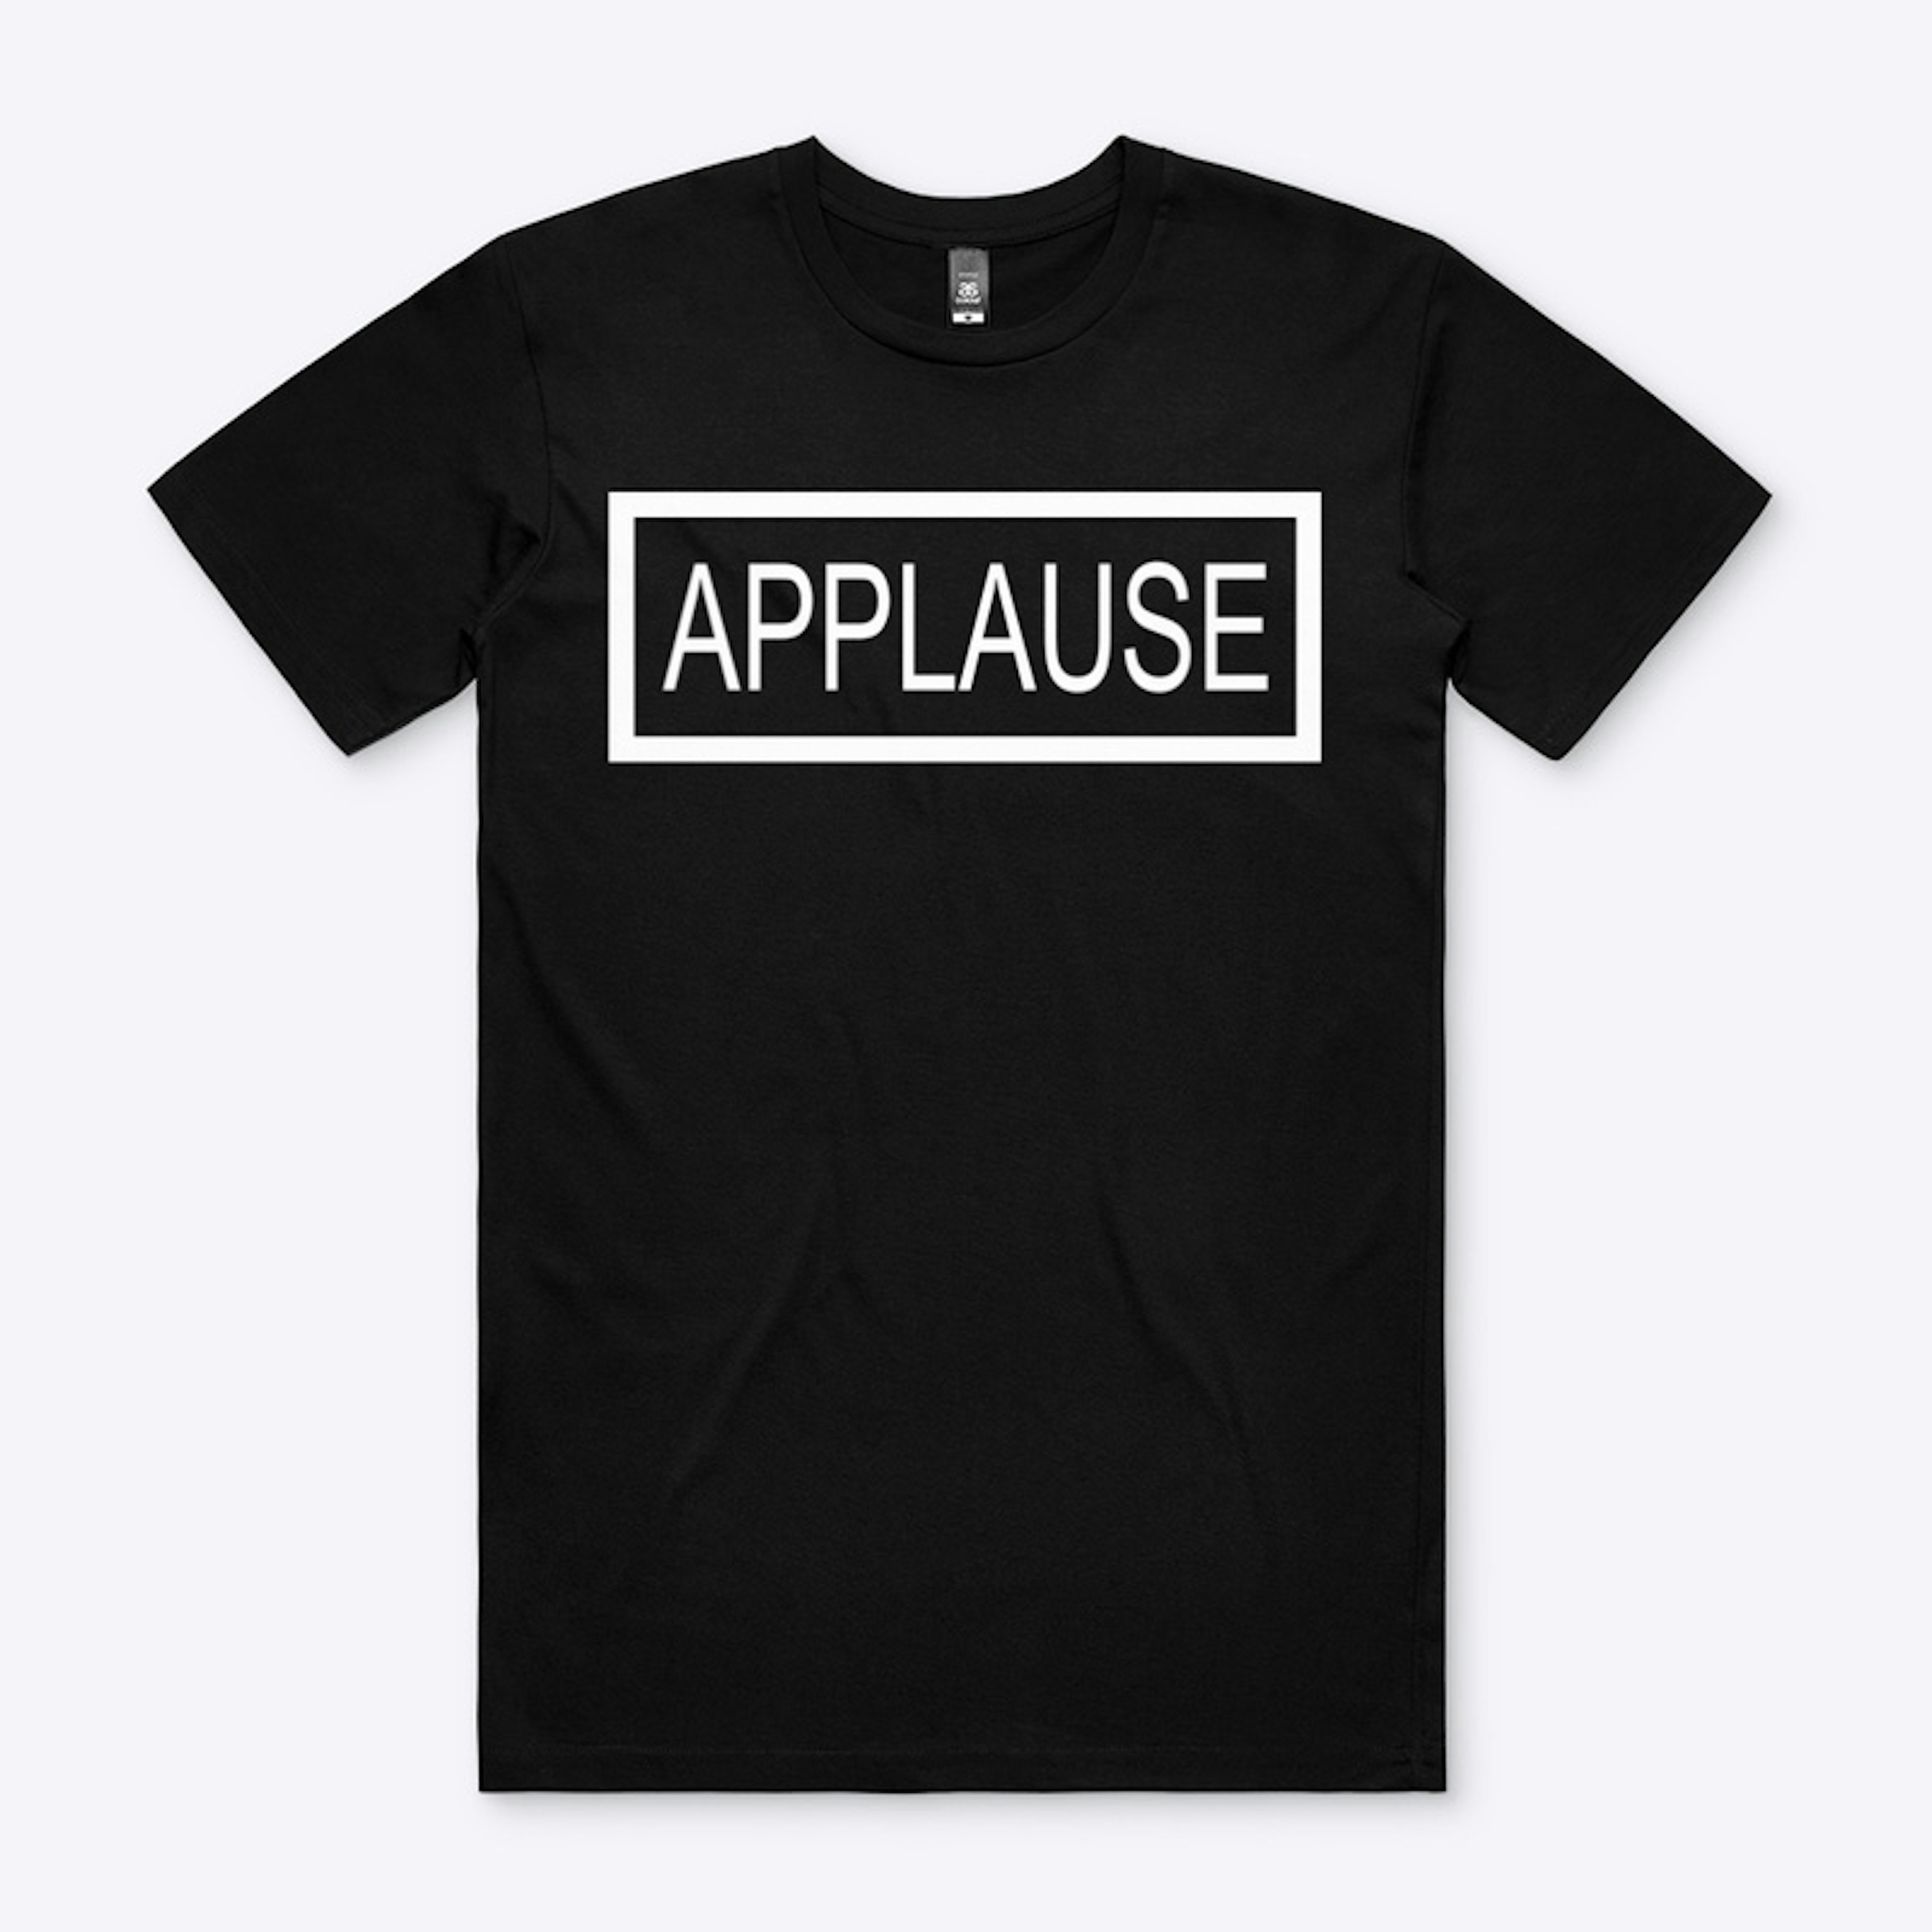 Applause please